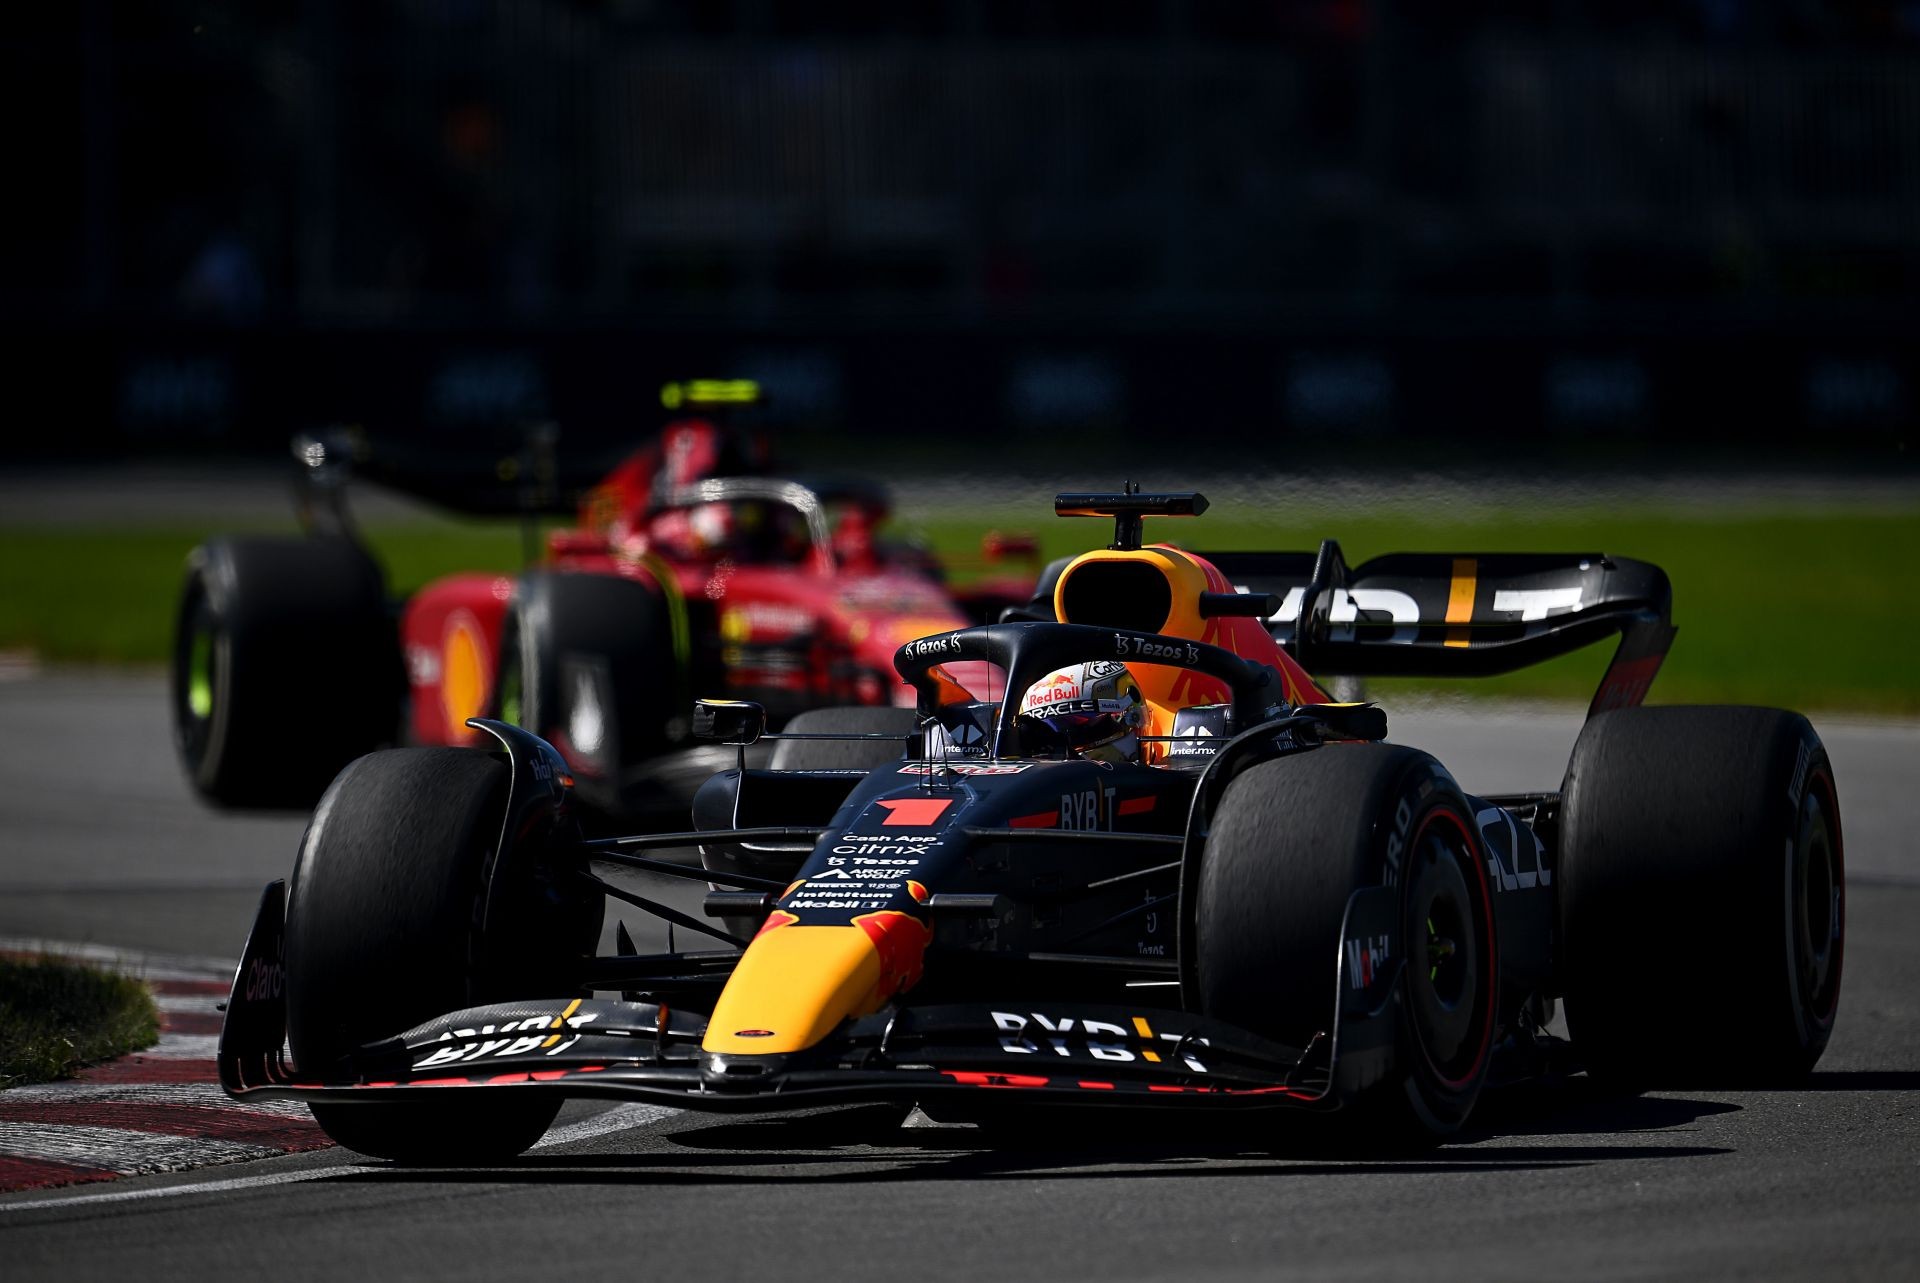 F1 News: Max Verstappen does not have 2022 F1 World Championship wrapped up feels David Coulthard